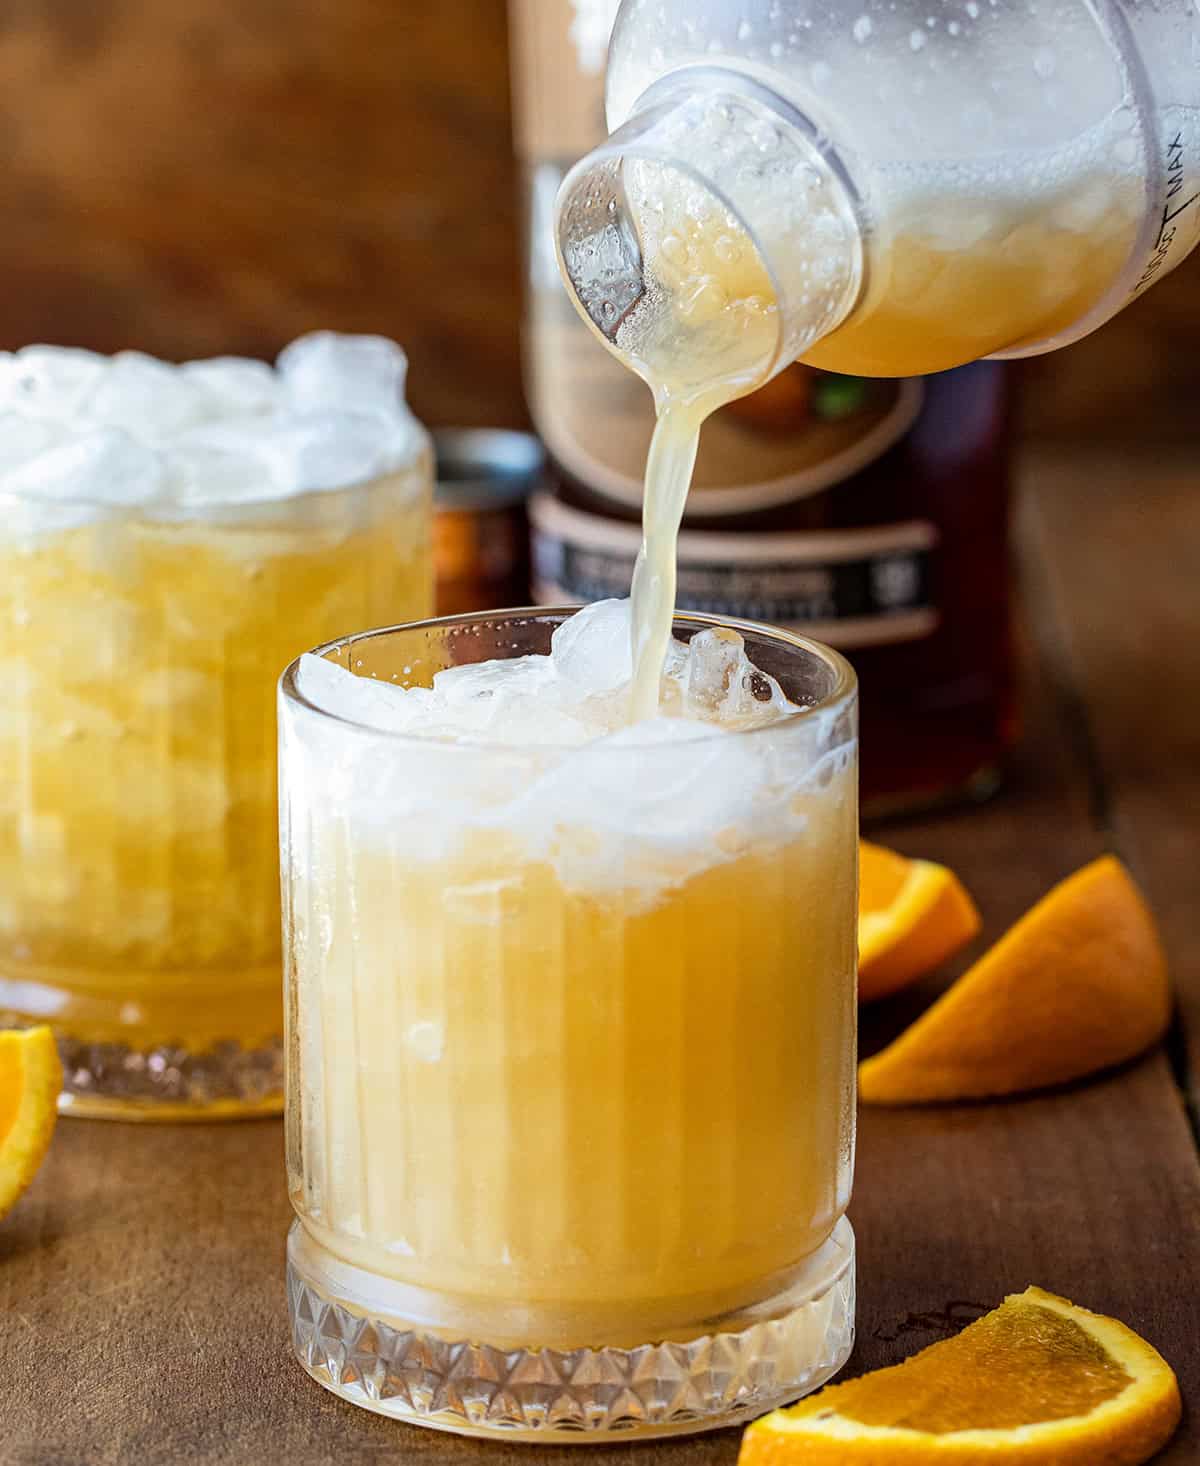 Pouring the Amaretto Sour cocktail into a glass with ice.